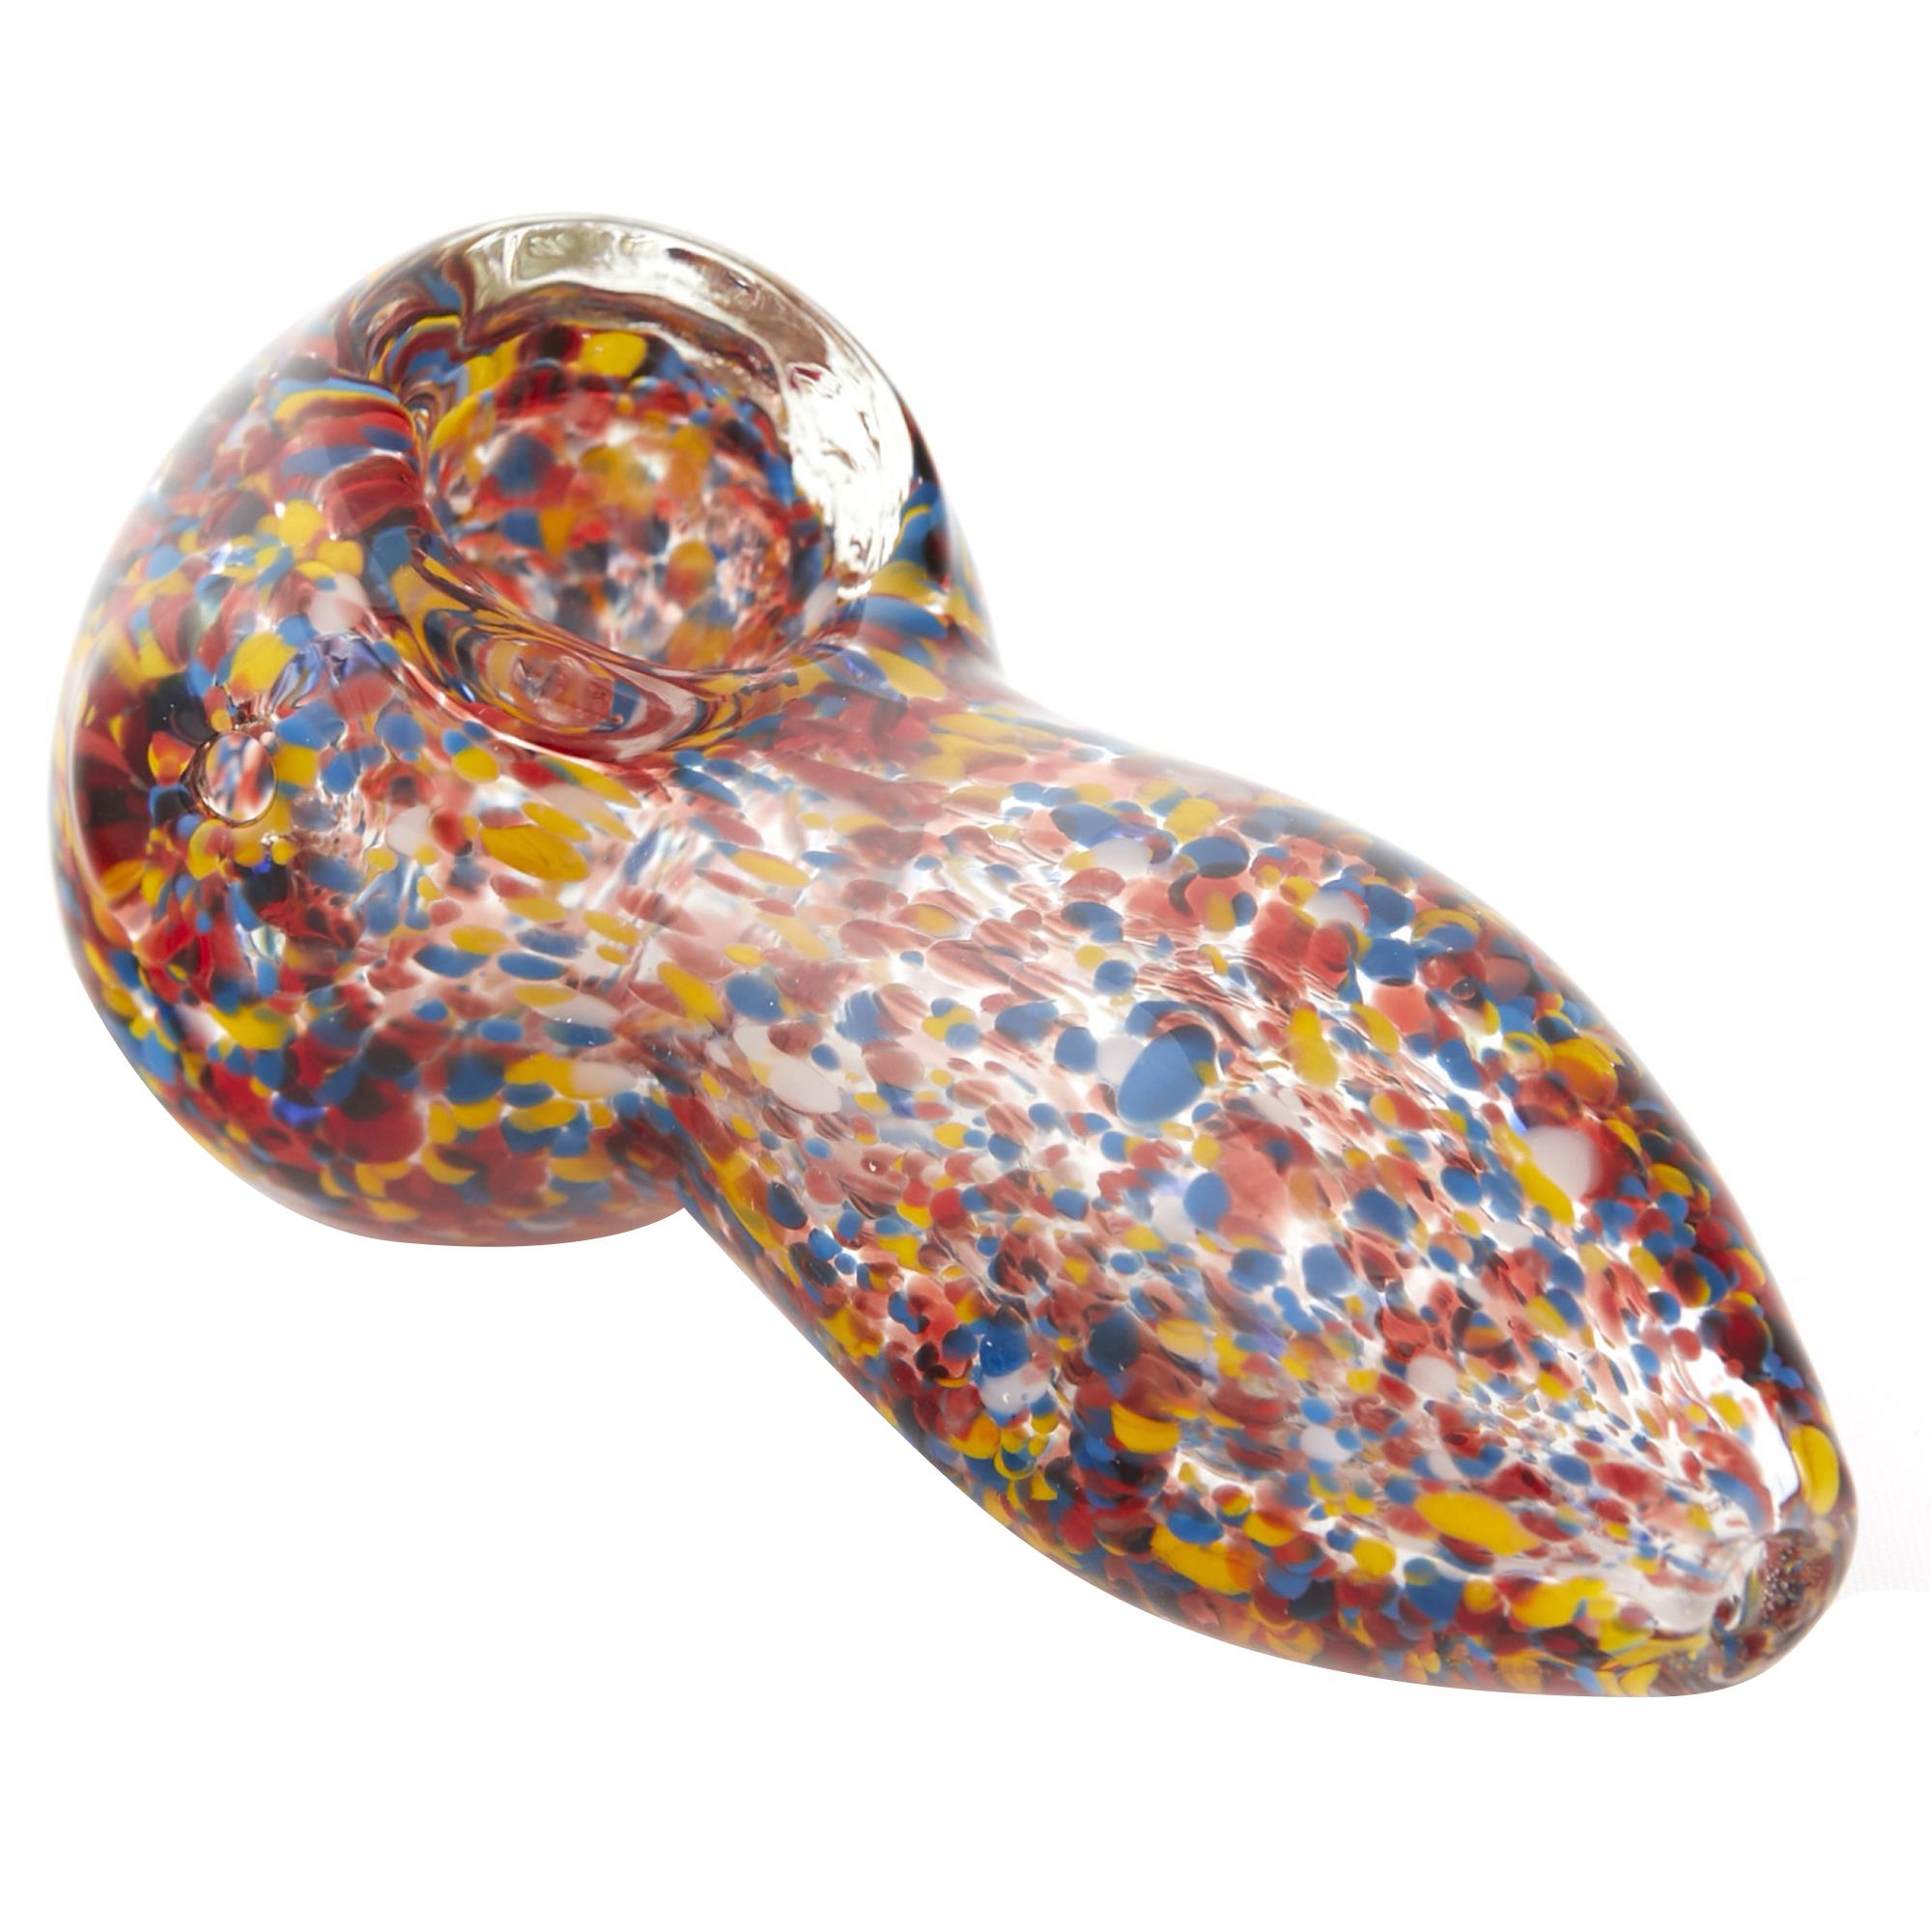 STAY TRIPPY SPOON PIPE